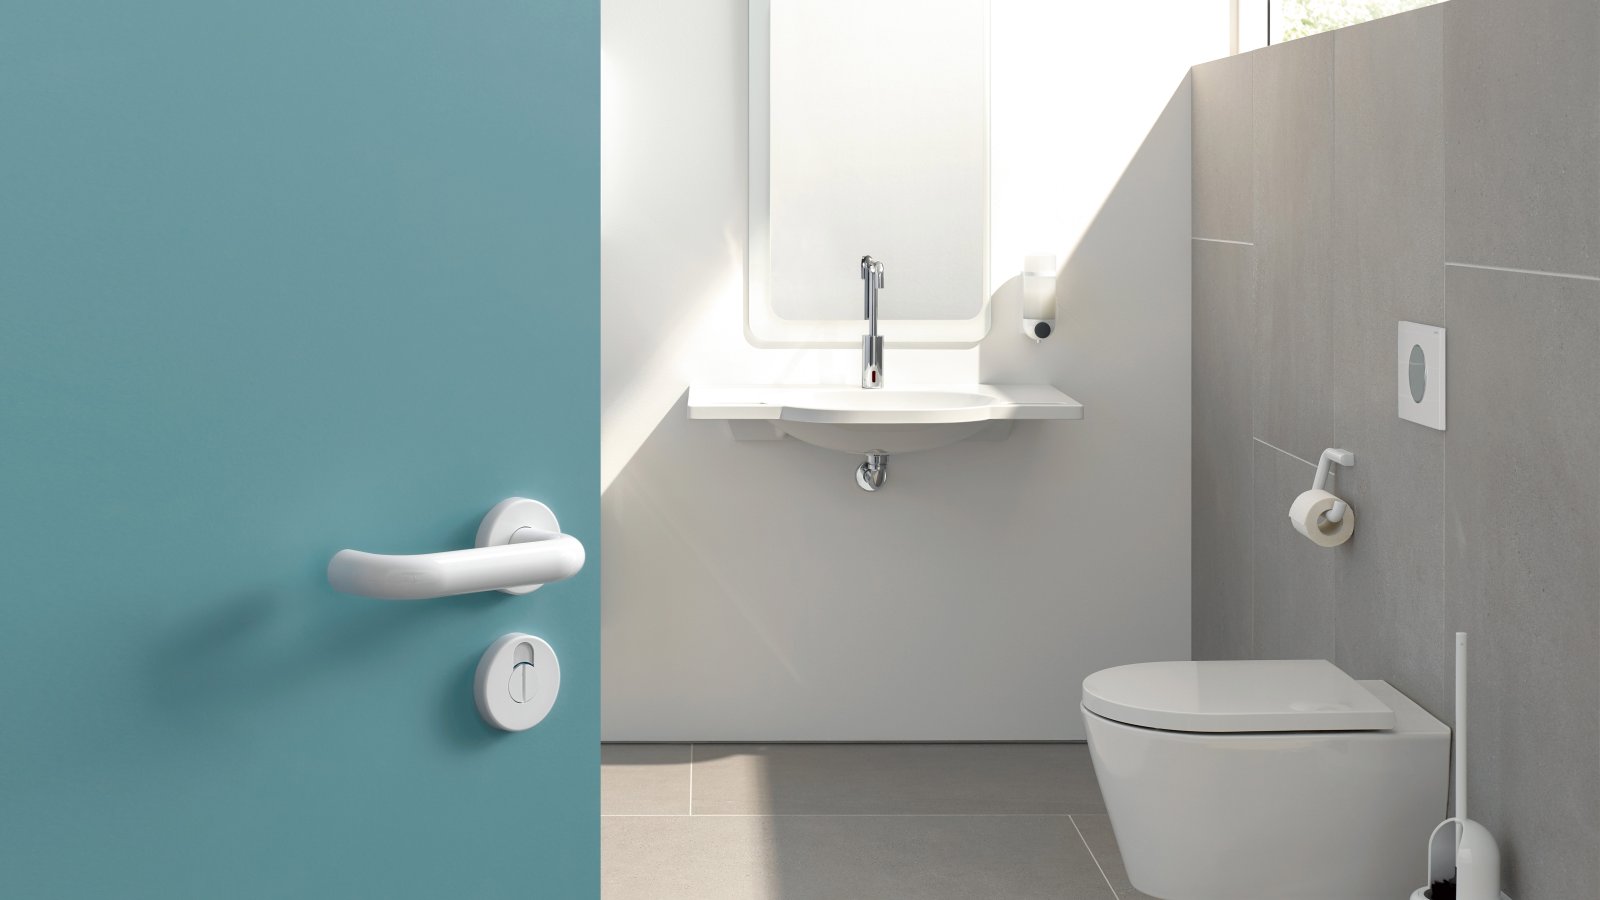 White lever handle on a blue door with a view into a bright small bathroom